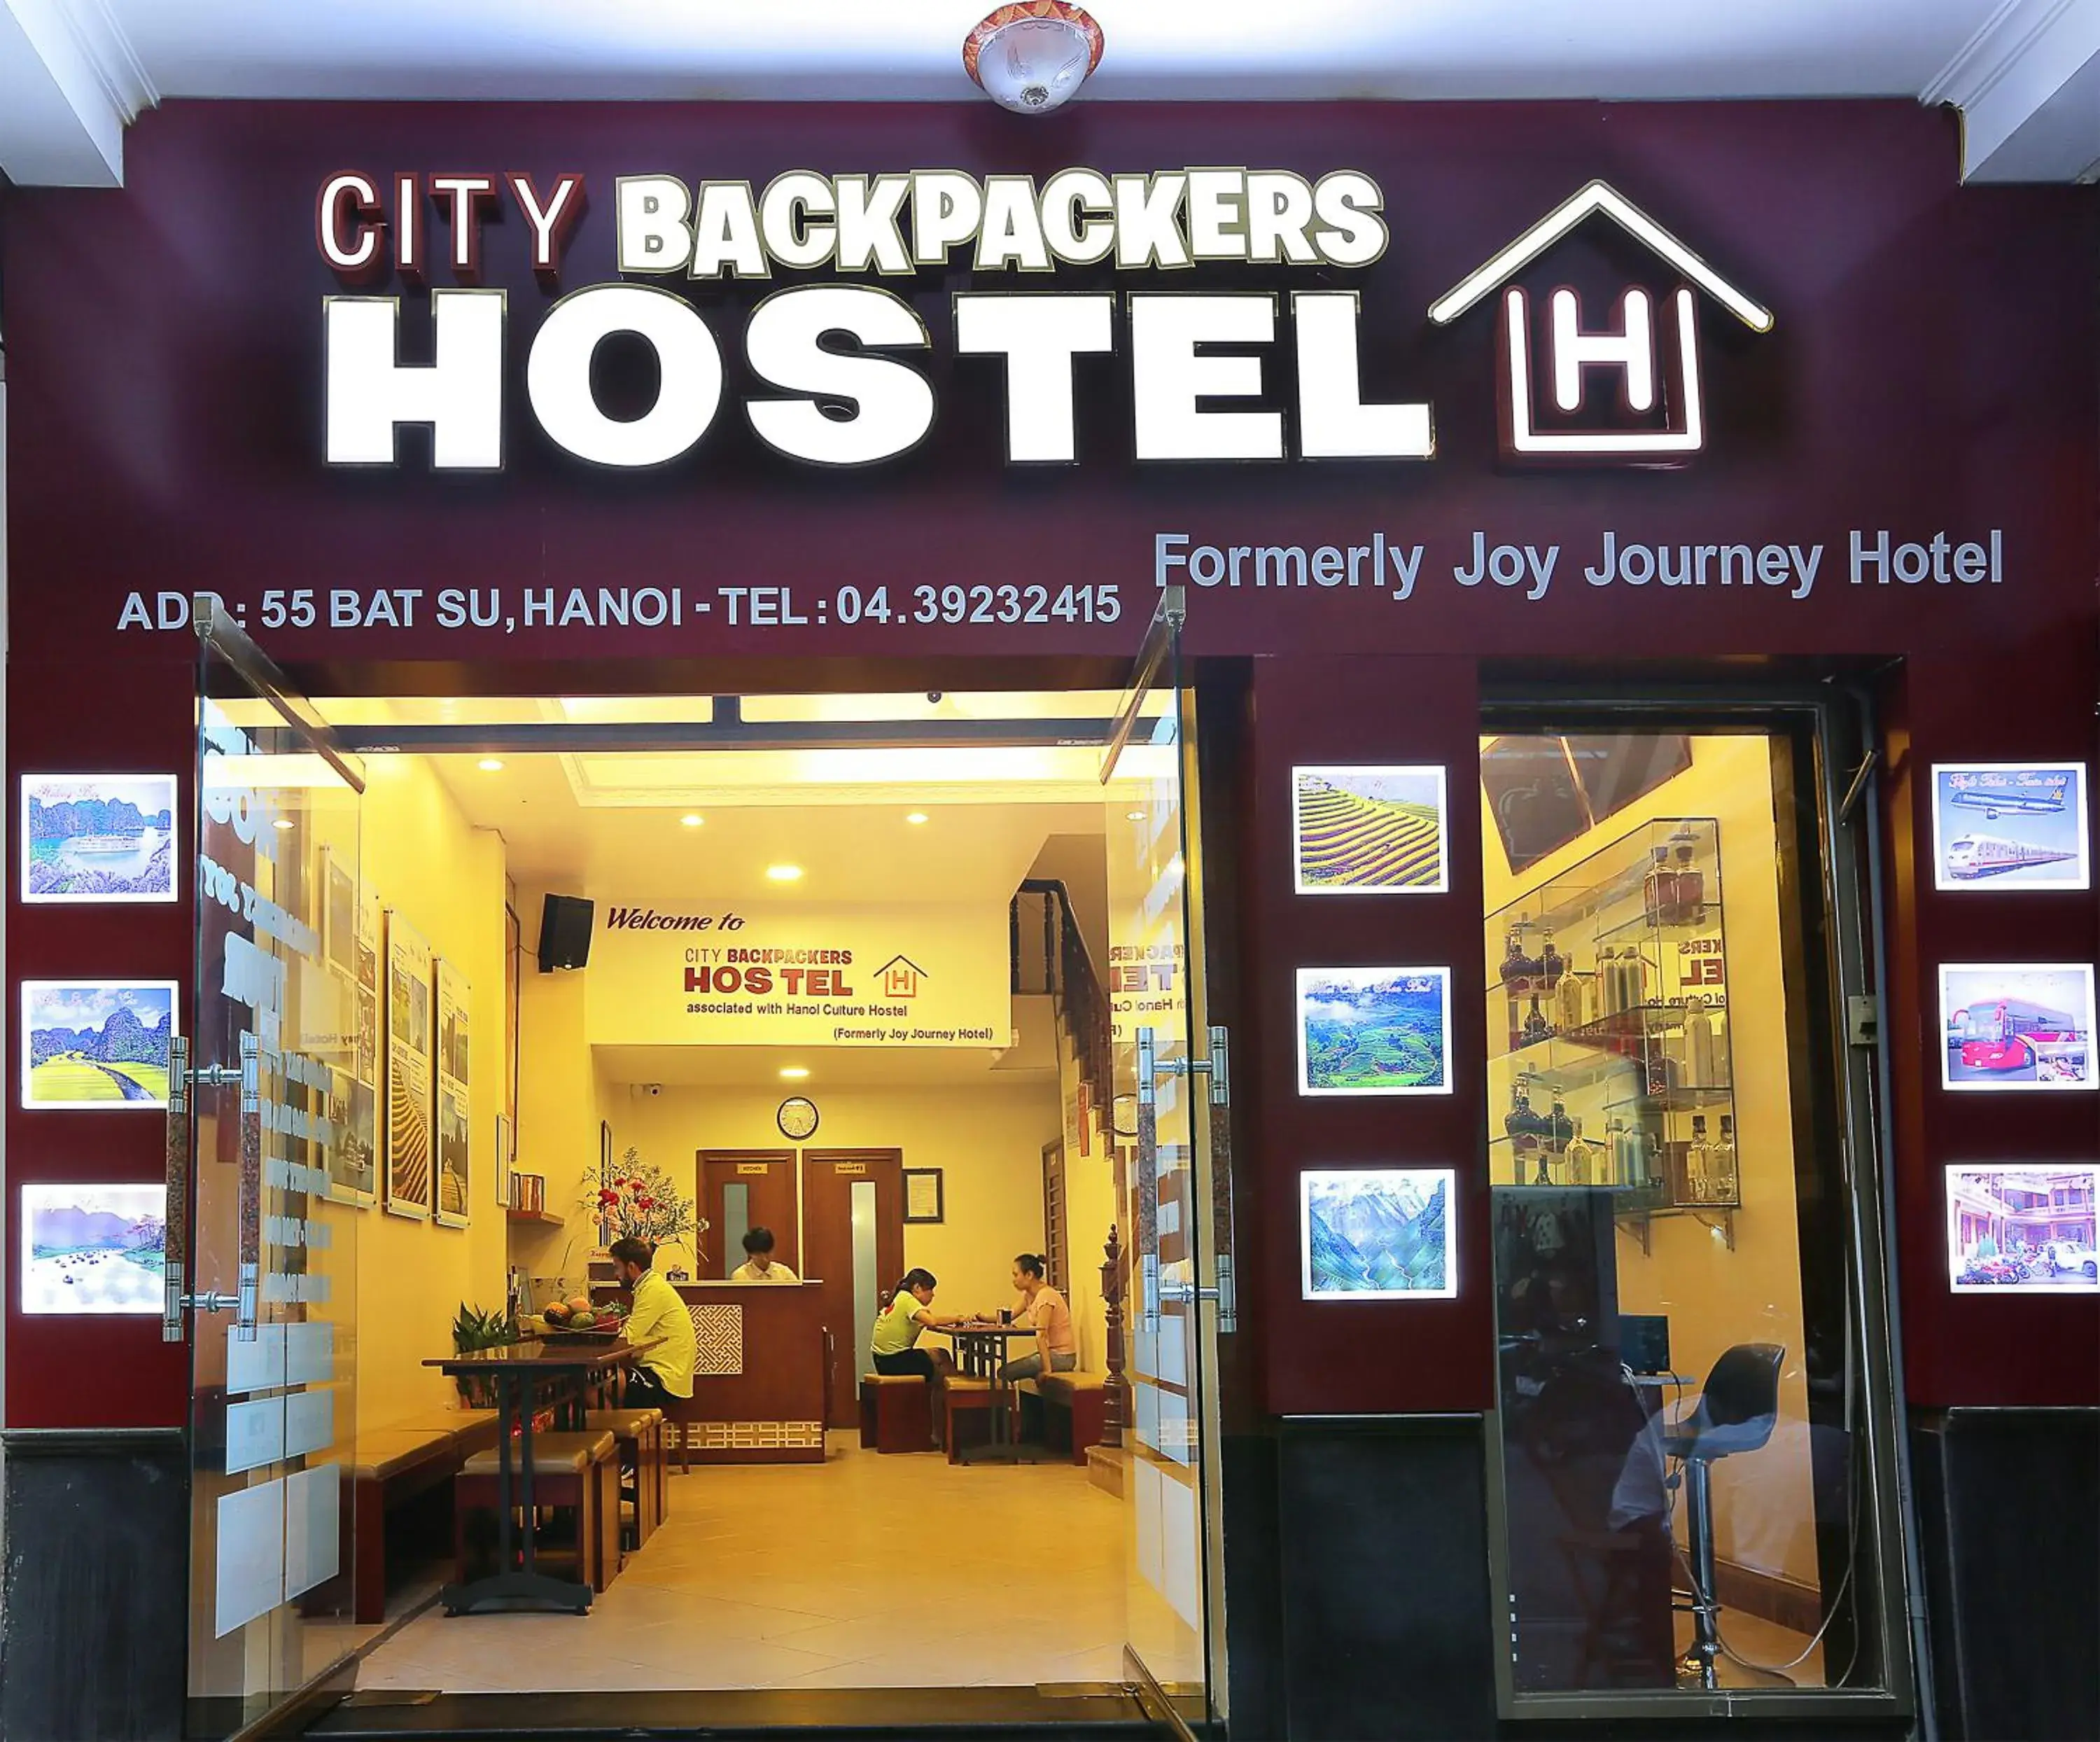 Property logo or sign in Hanoi City Backpackers Hostel